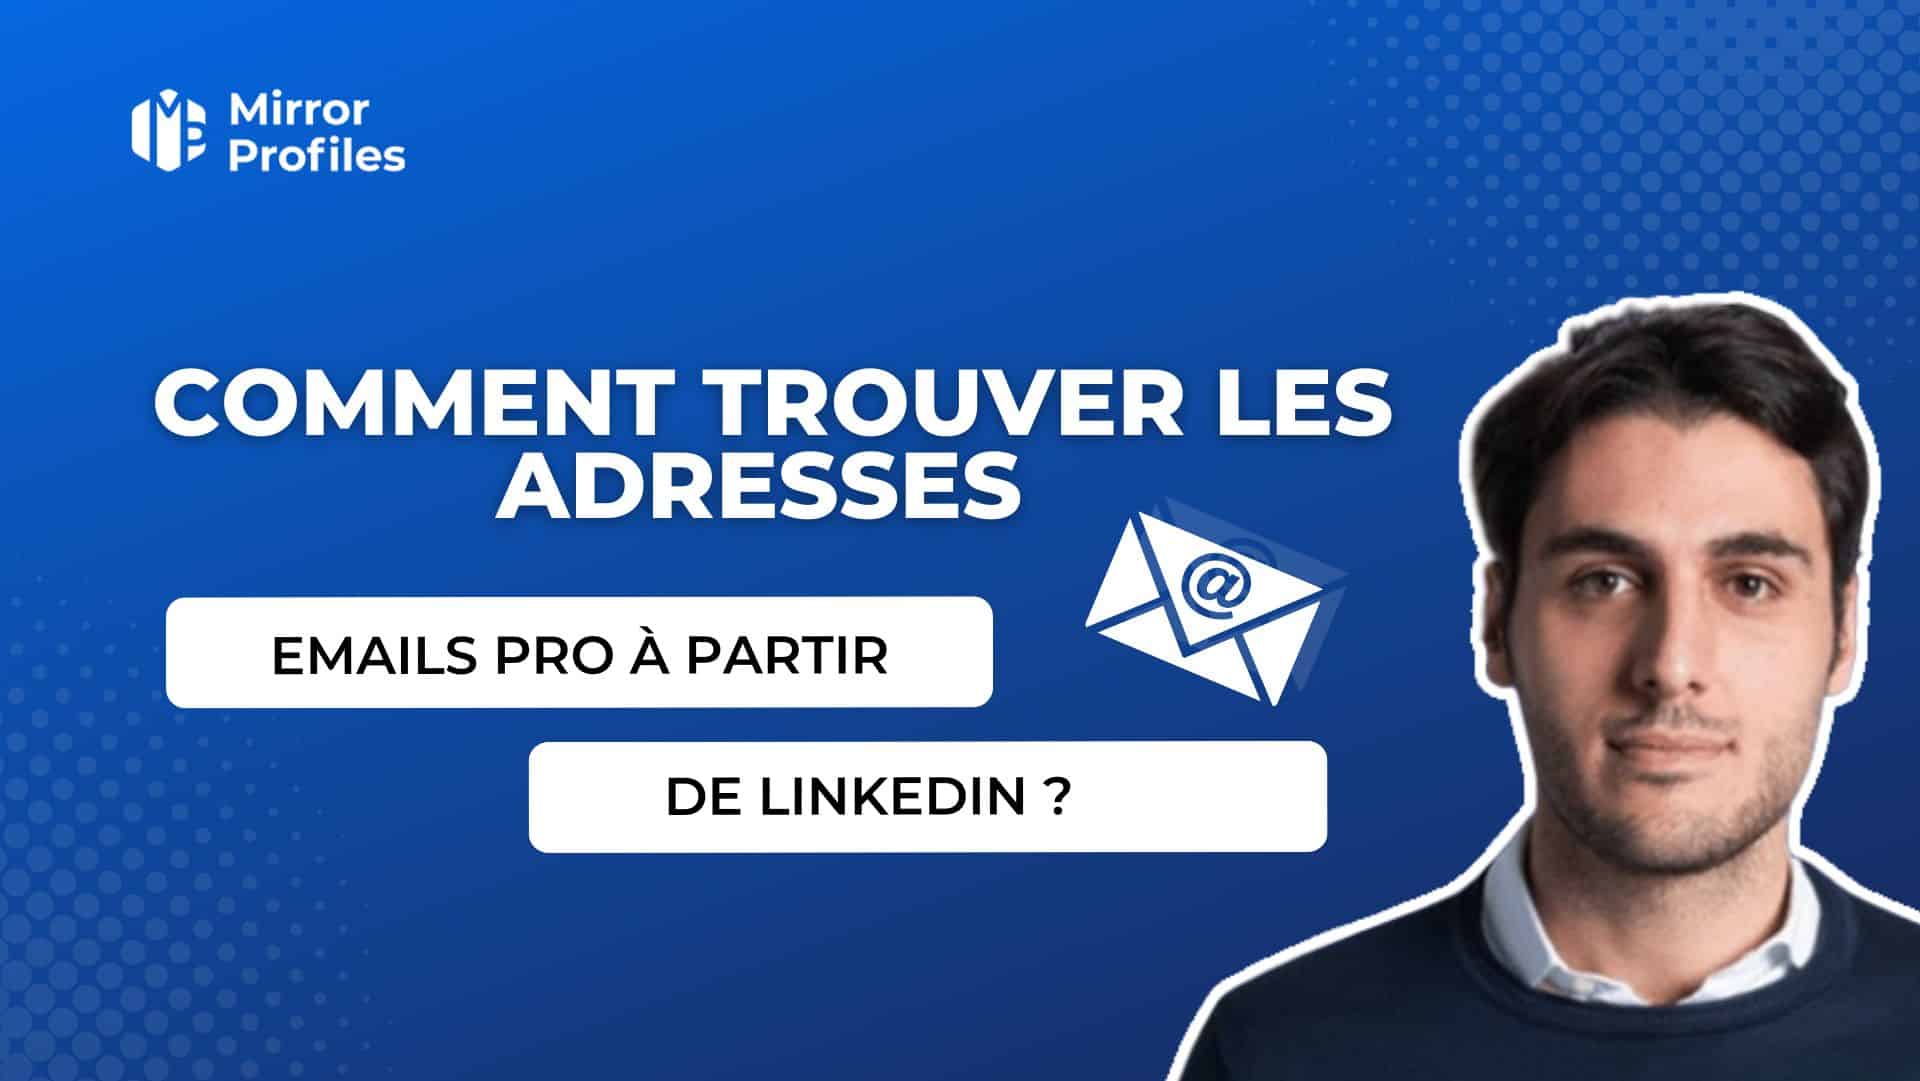 Advertisement for Mirror Profiles showing a man and text in French: "Comment trouver les adresses emails pro à partir de LinkedIn ?" against a blue background. Discover how to find LinkedIn pro email addresses effortlessly.